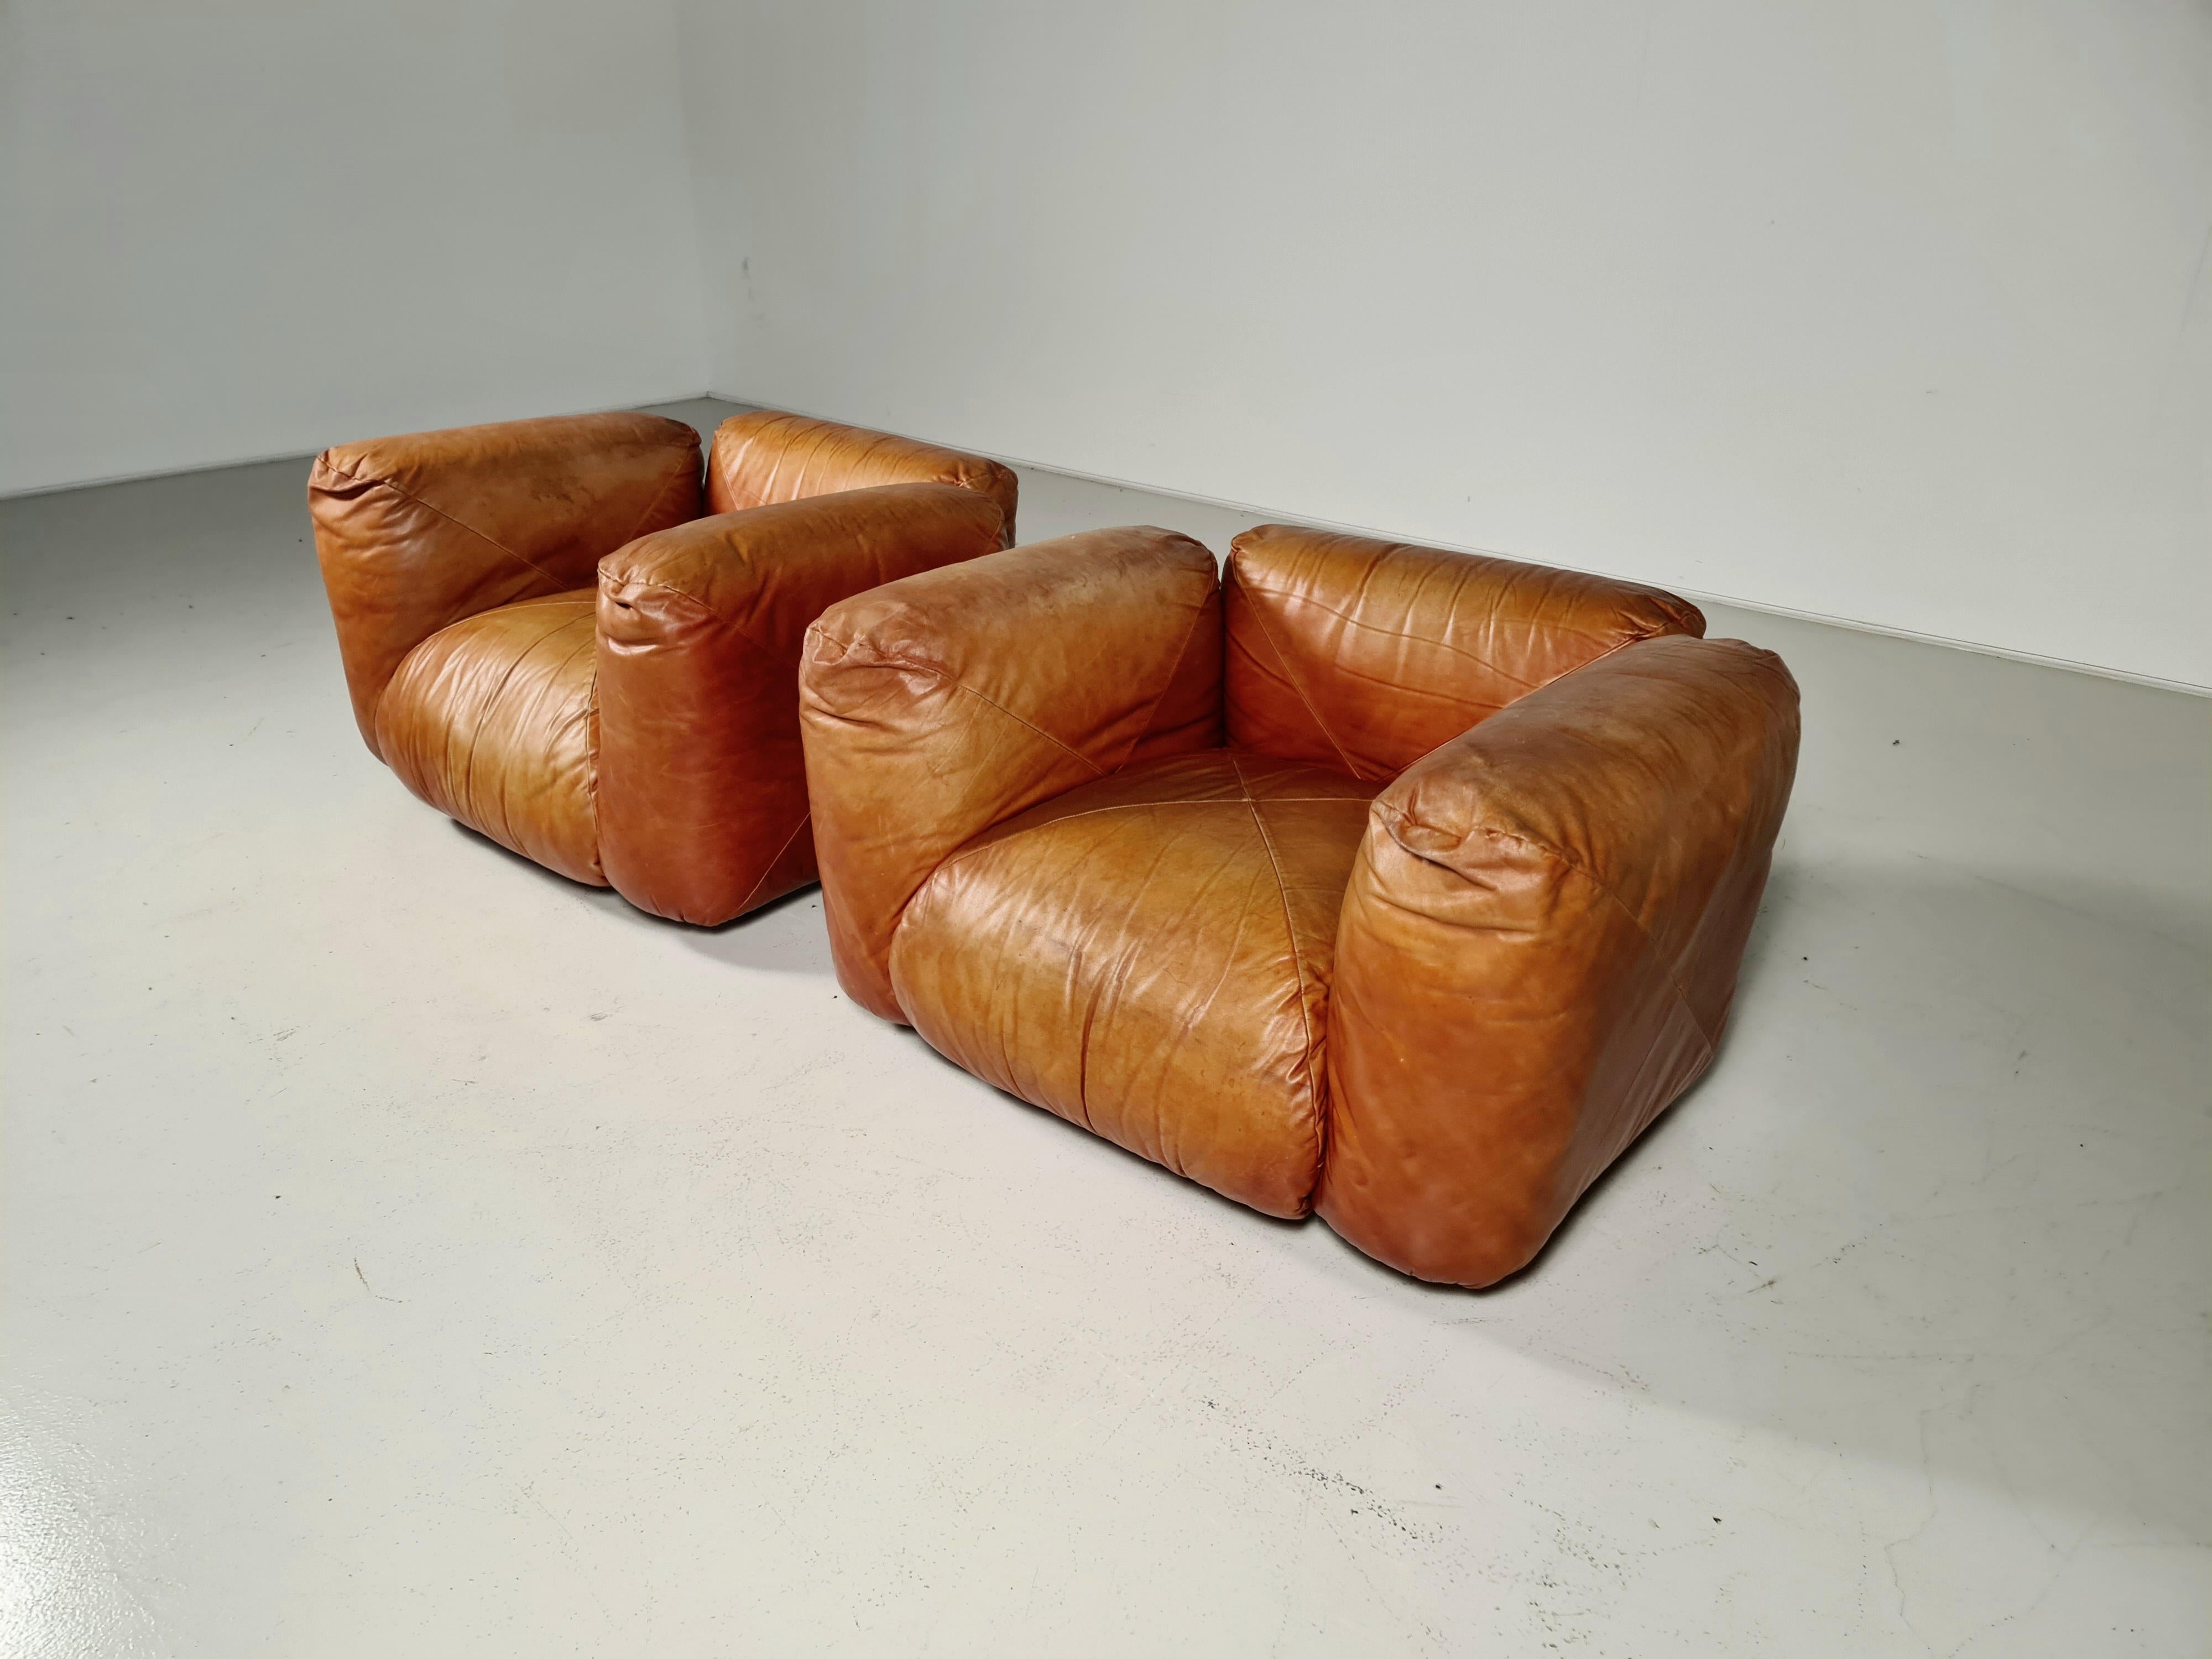 Pair of Cognac leather lounge chairs produced by Arflex in the 70s. Designed by Mario Marenco. Wooden base. The seat, back, and armrests are made of padded cushions. We also have a matching 3-seater sofa available.